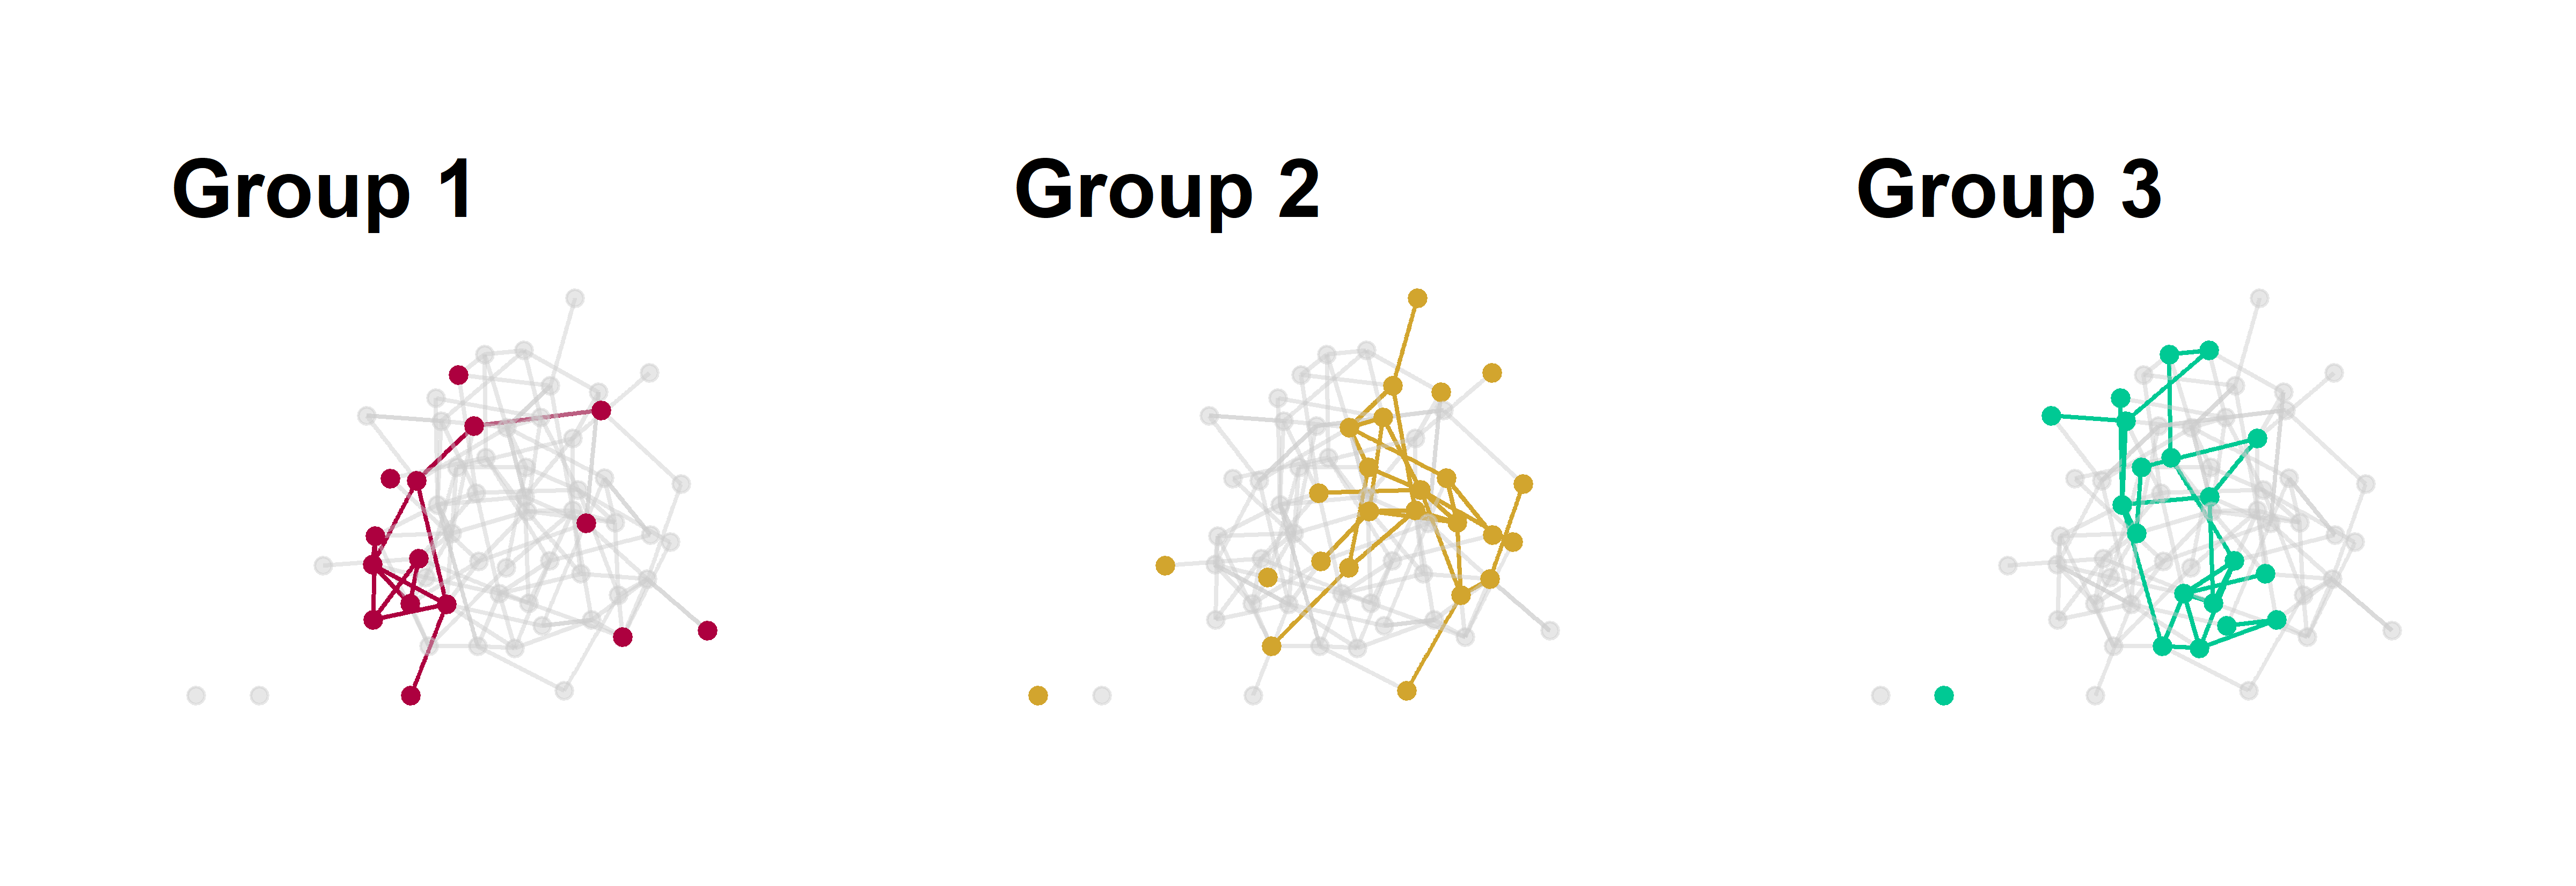 Group substructure in a homophilous network. Each panel emphasizes one group of nodes in the graph with all other edges colored grey.